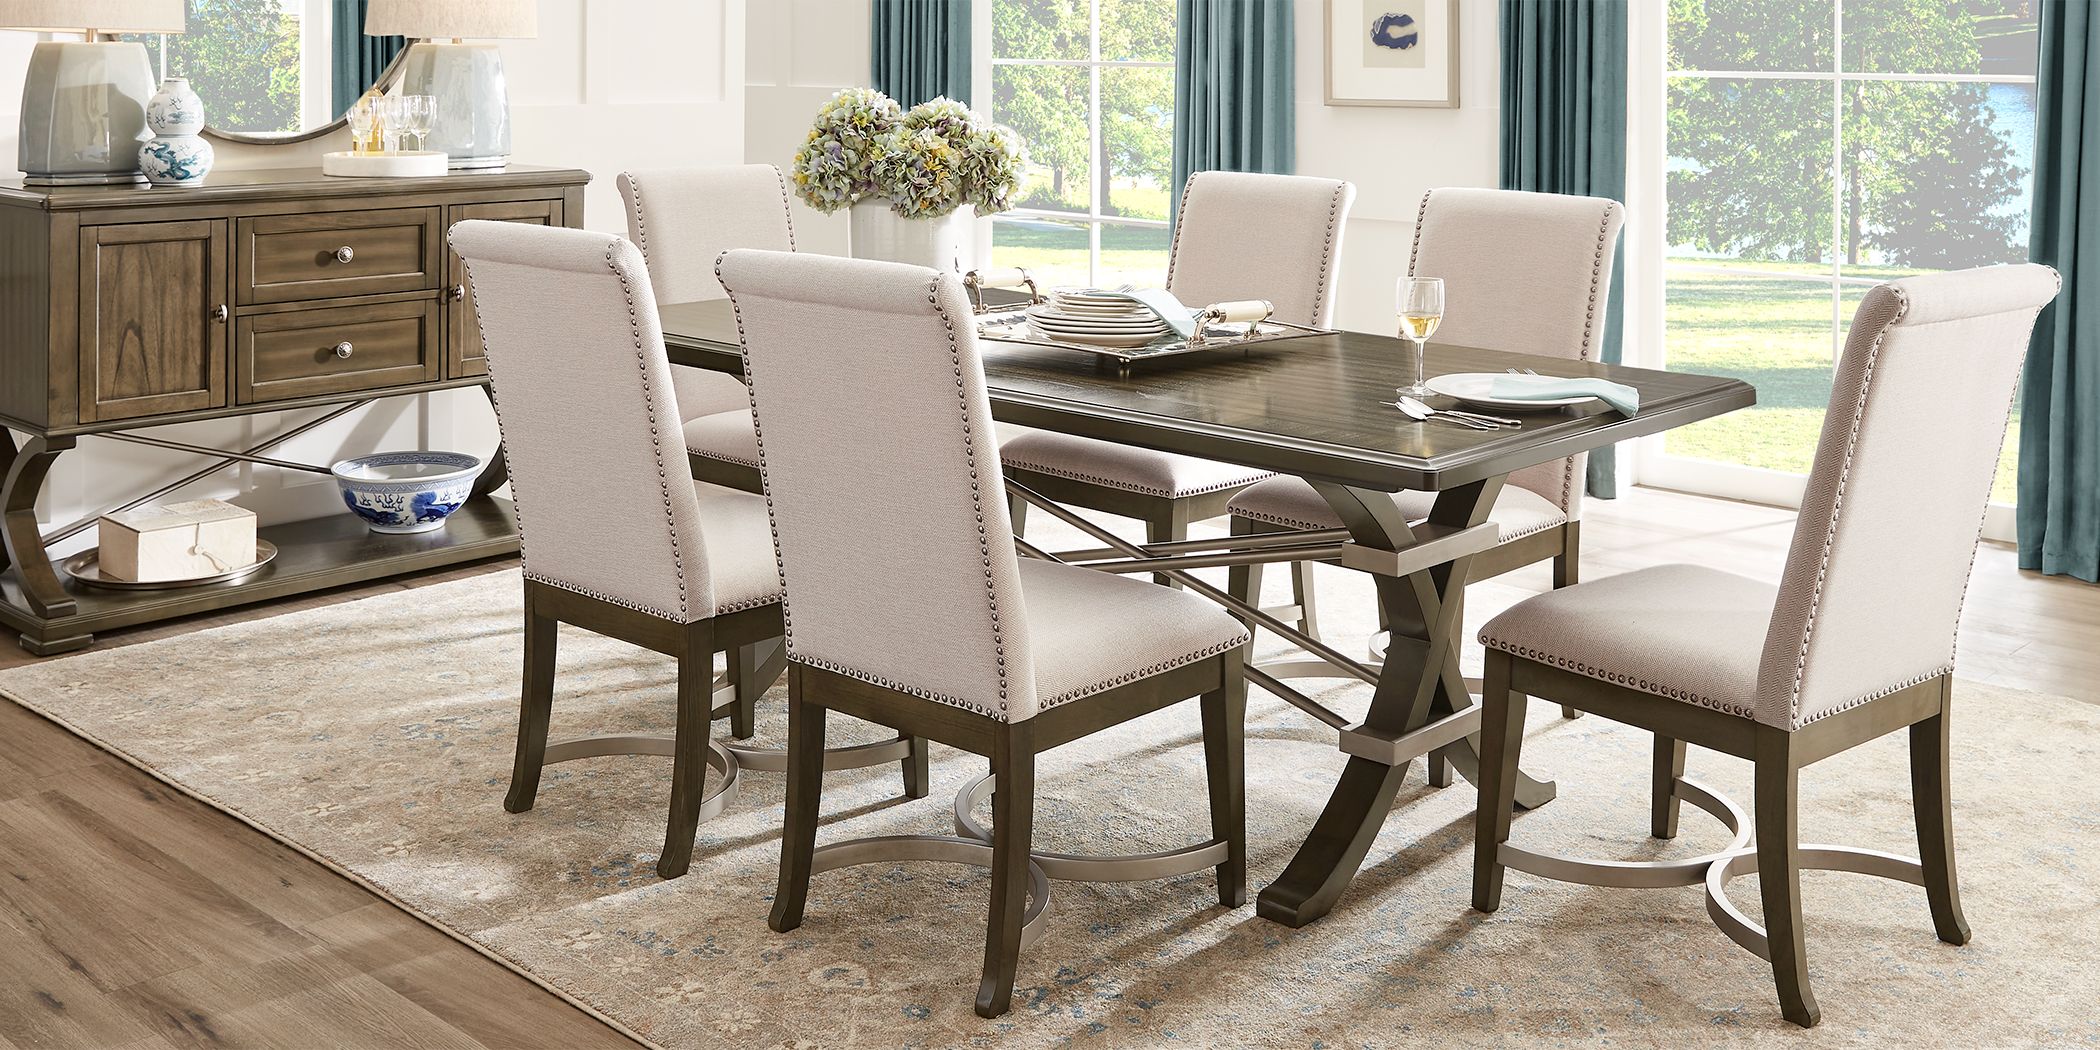 Abbey Court Brown 8 Pc Dining Room